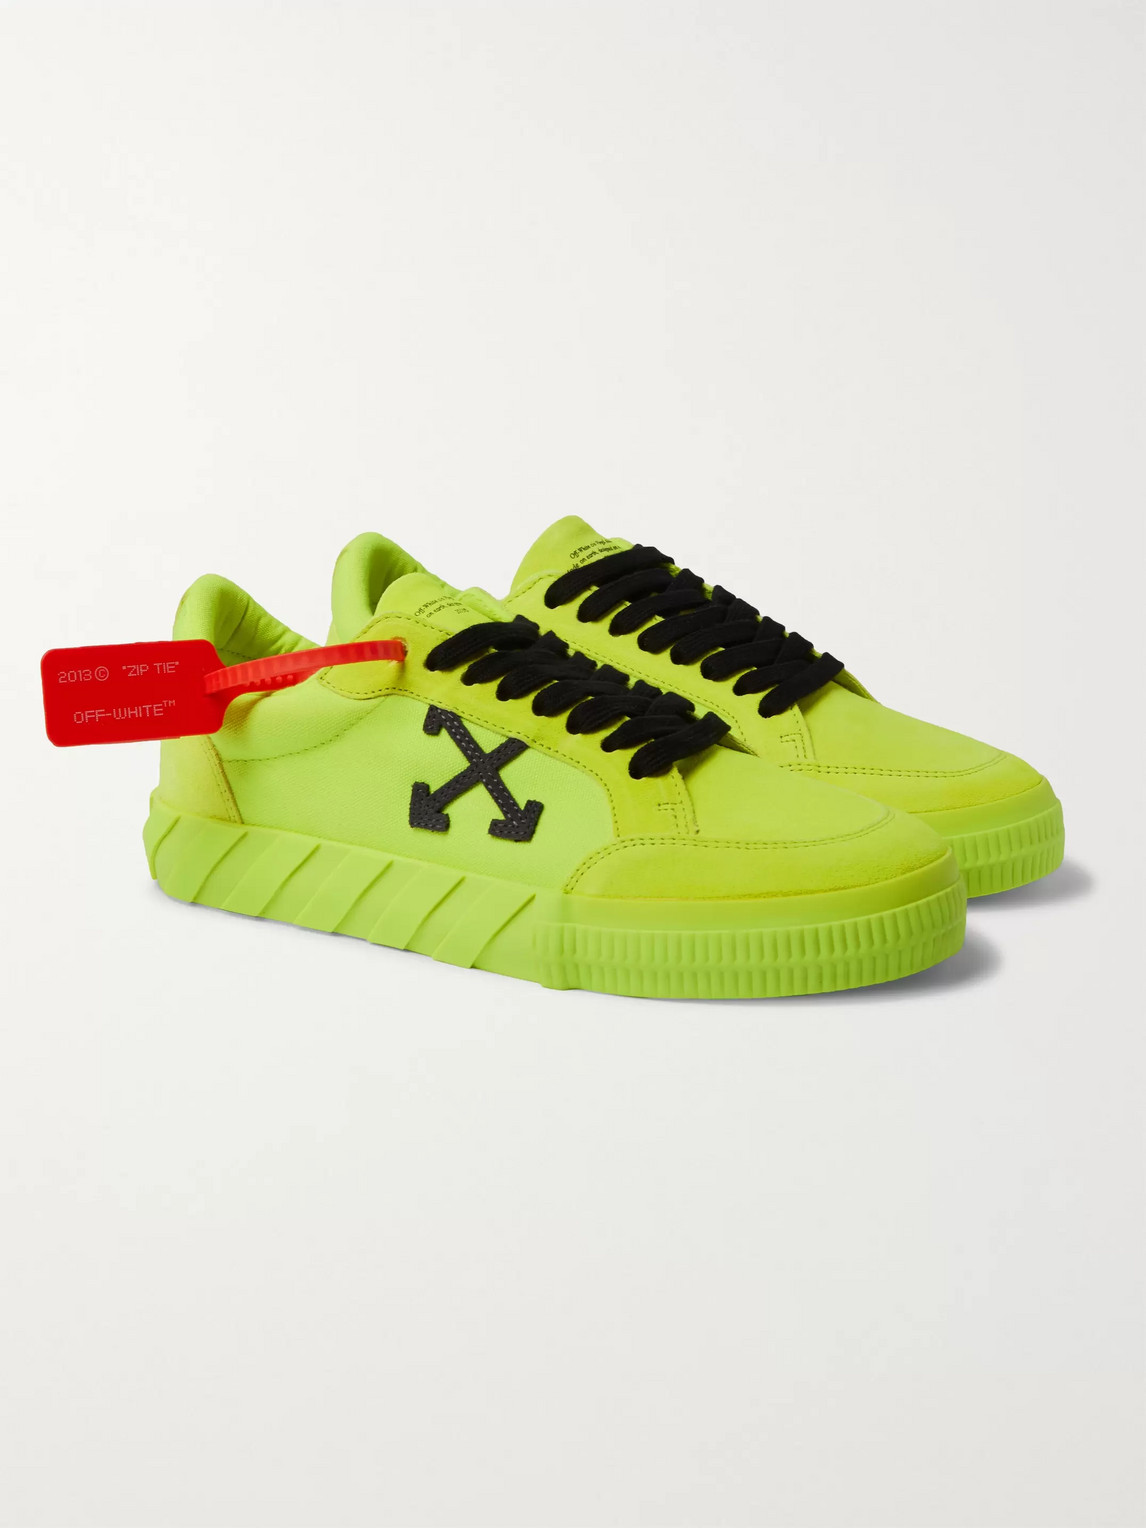 OFF-WHITE NEON CANVAS AND SUEDE SNEAKERS